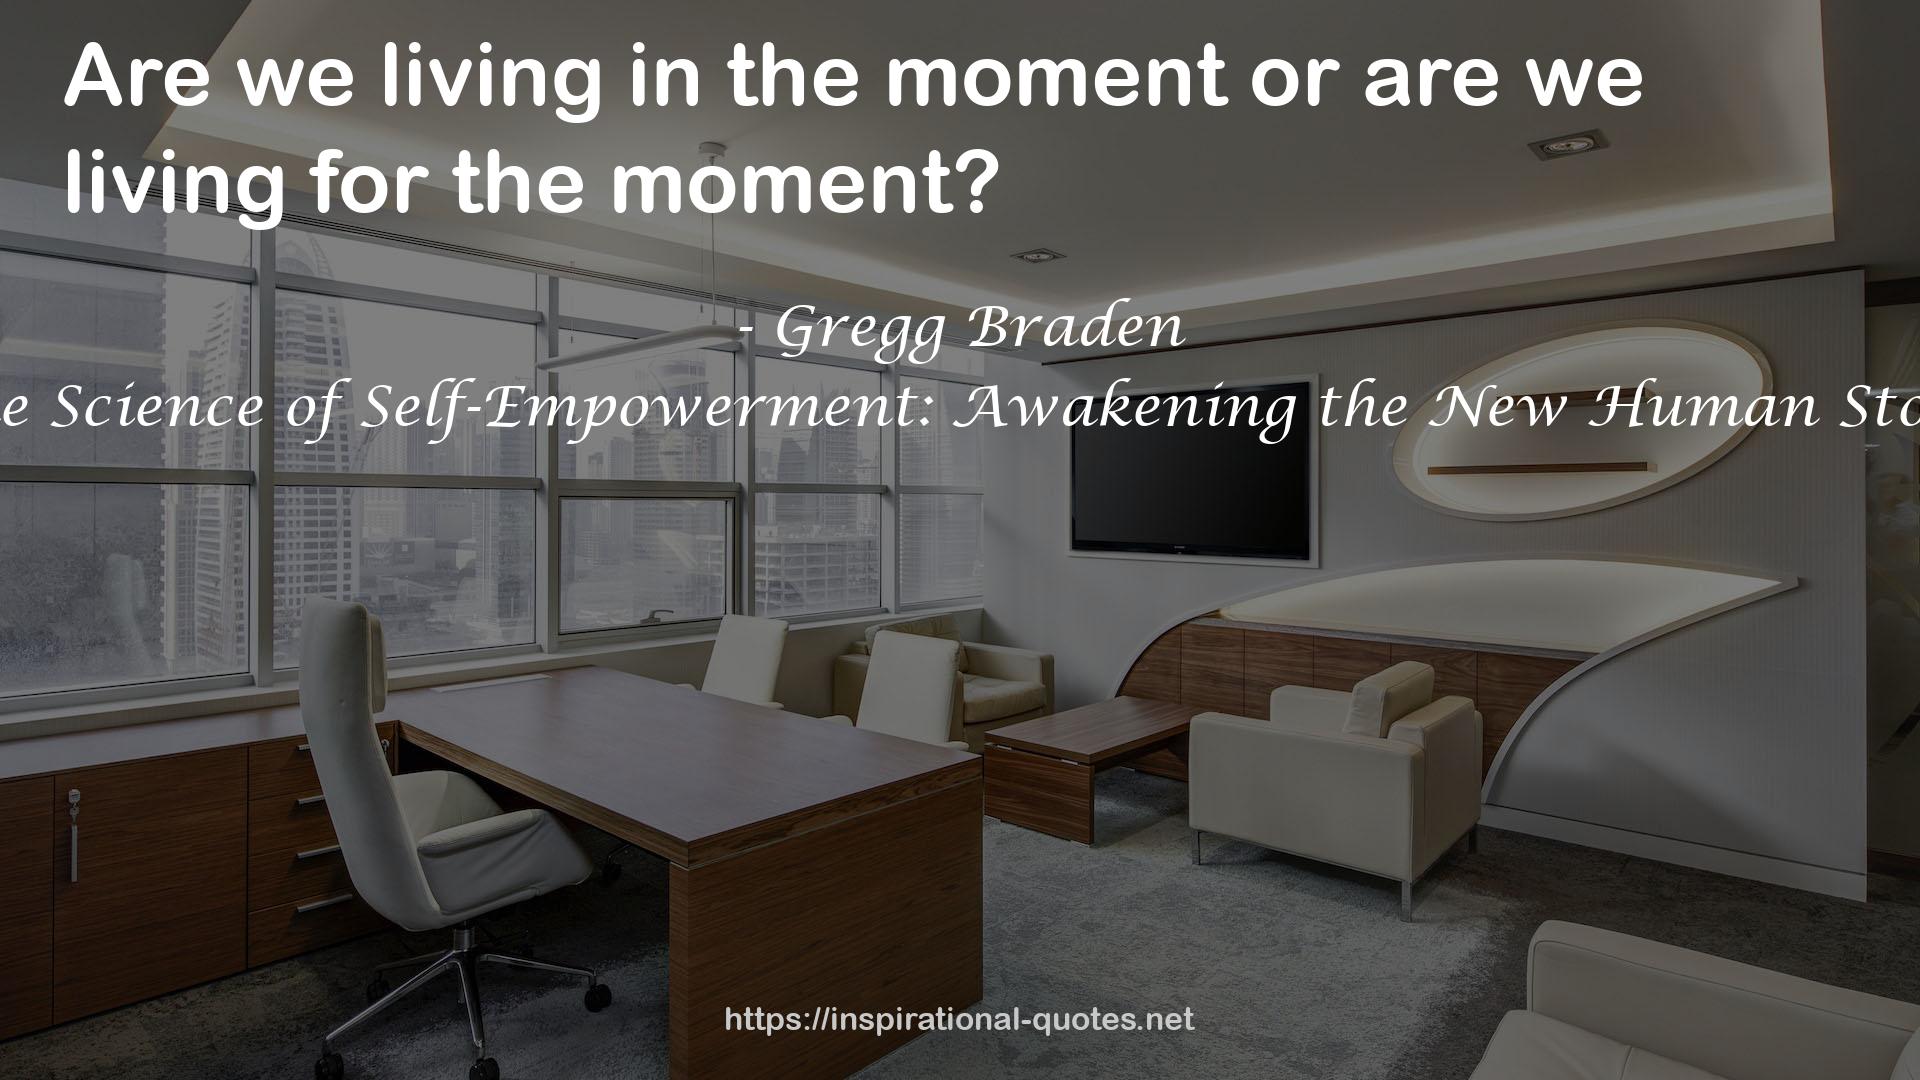 The Science of Self-Empowerment: Awakening the New Human Story QUOTES